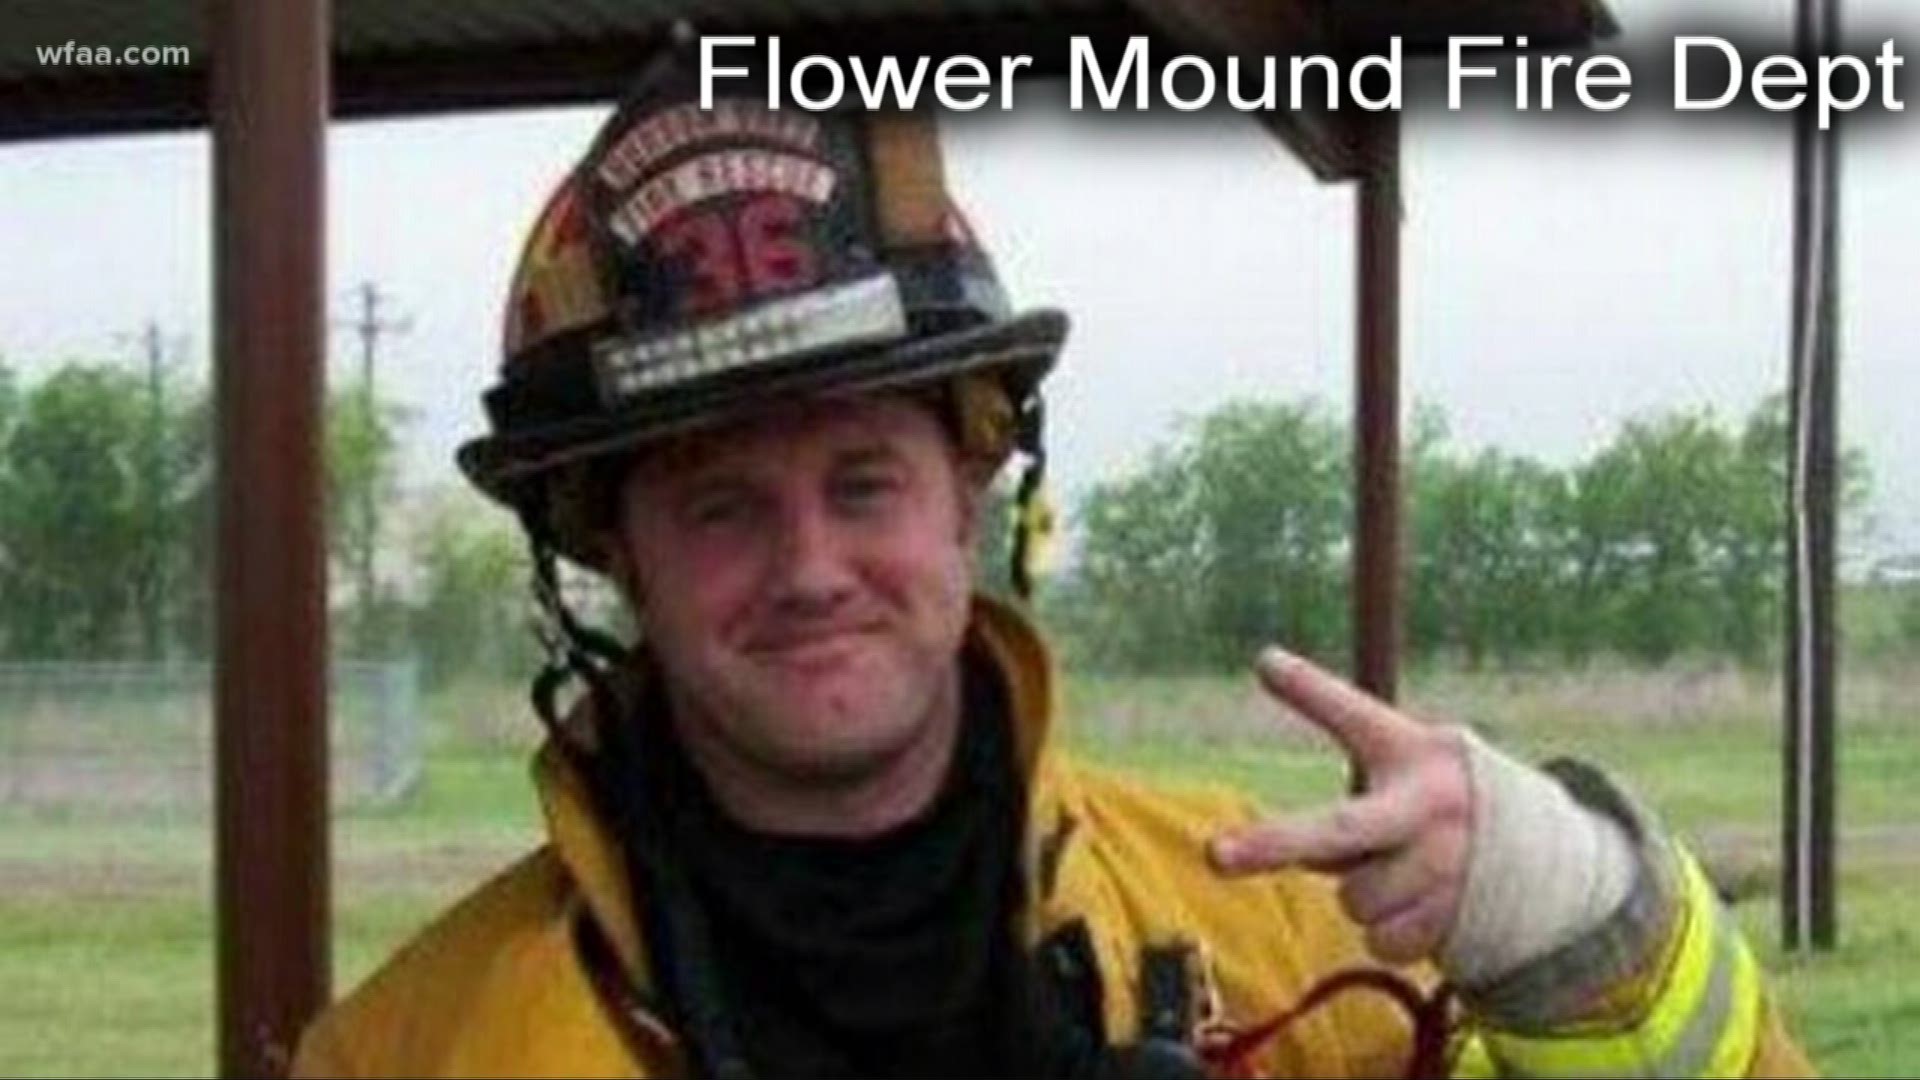 Weatherford firefighter dies after 'medical emergency' battling West Texas wildfires